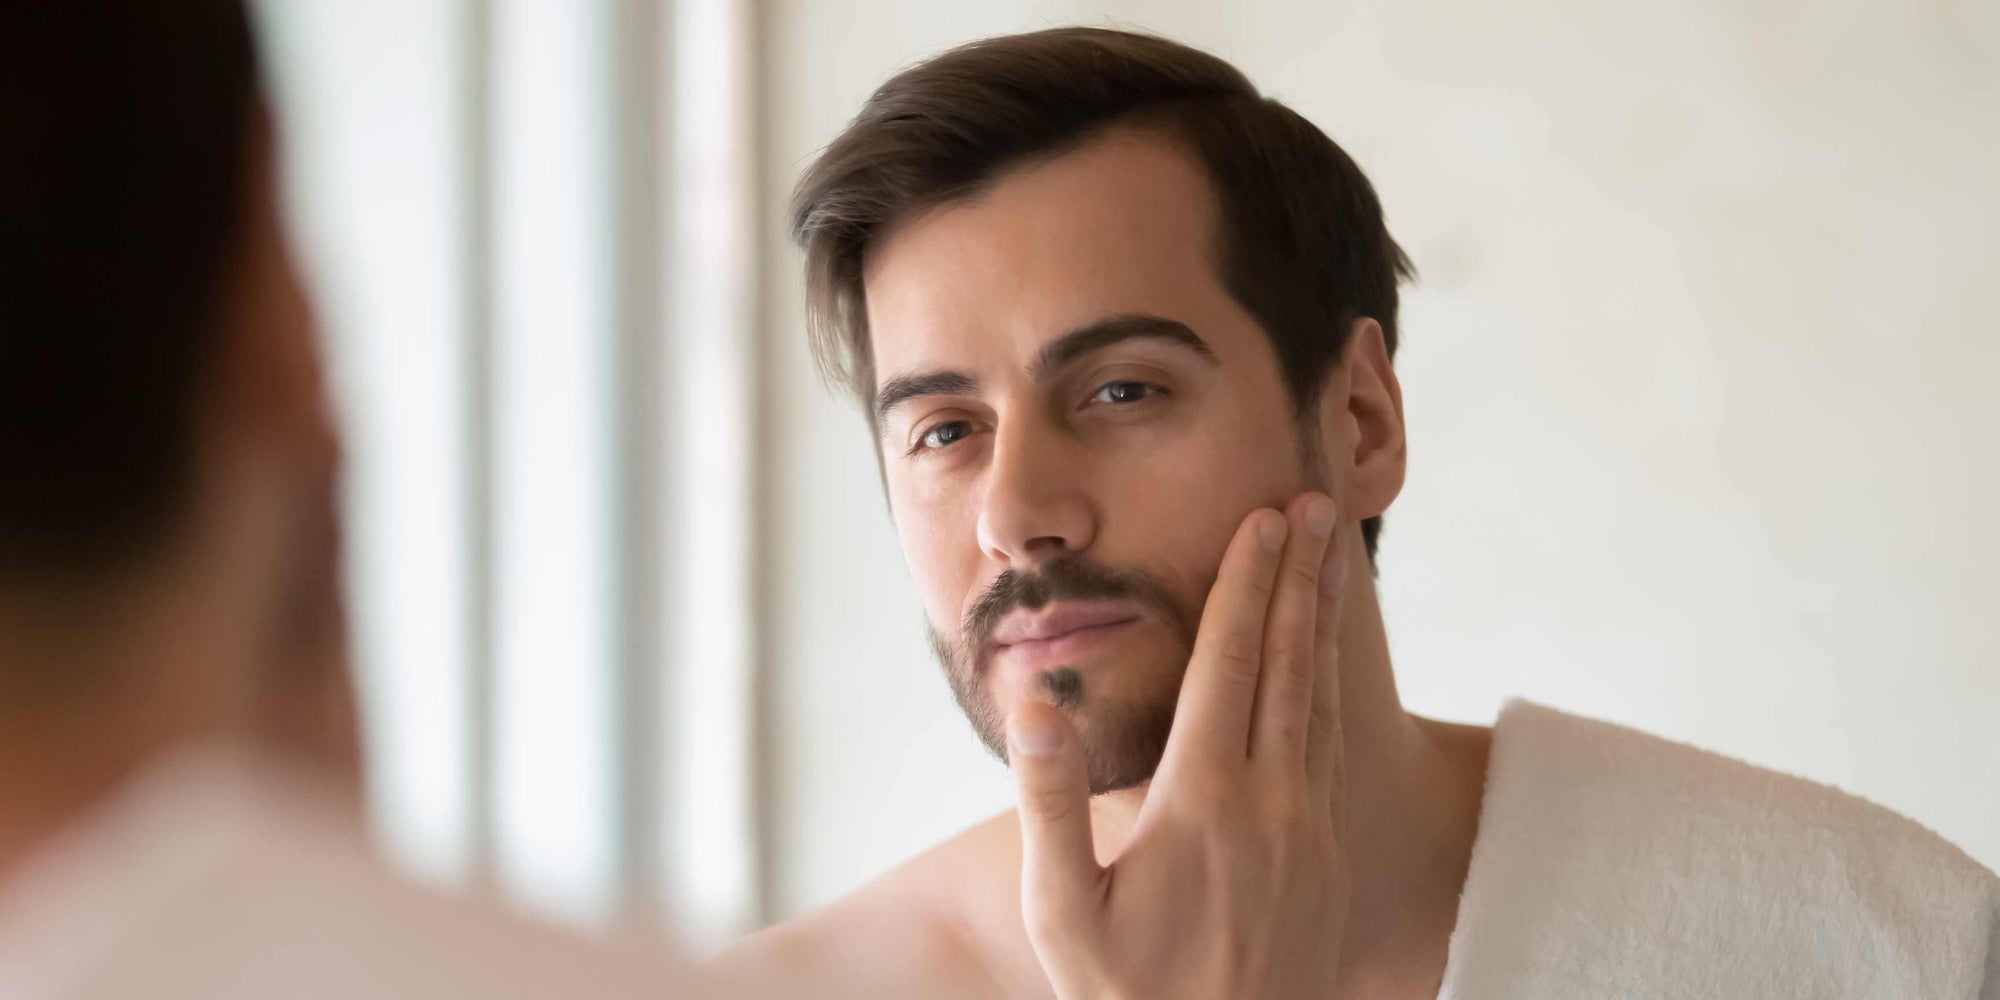 This is your complete guide to men’s skincare, from soothing ingredients to skincare routine steps to shaving 101.